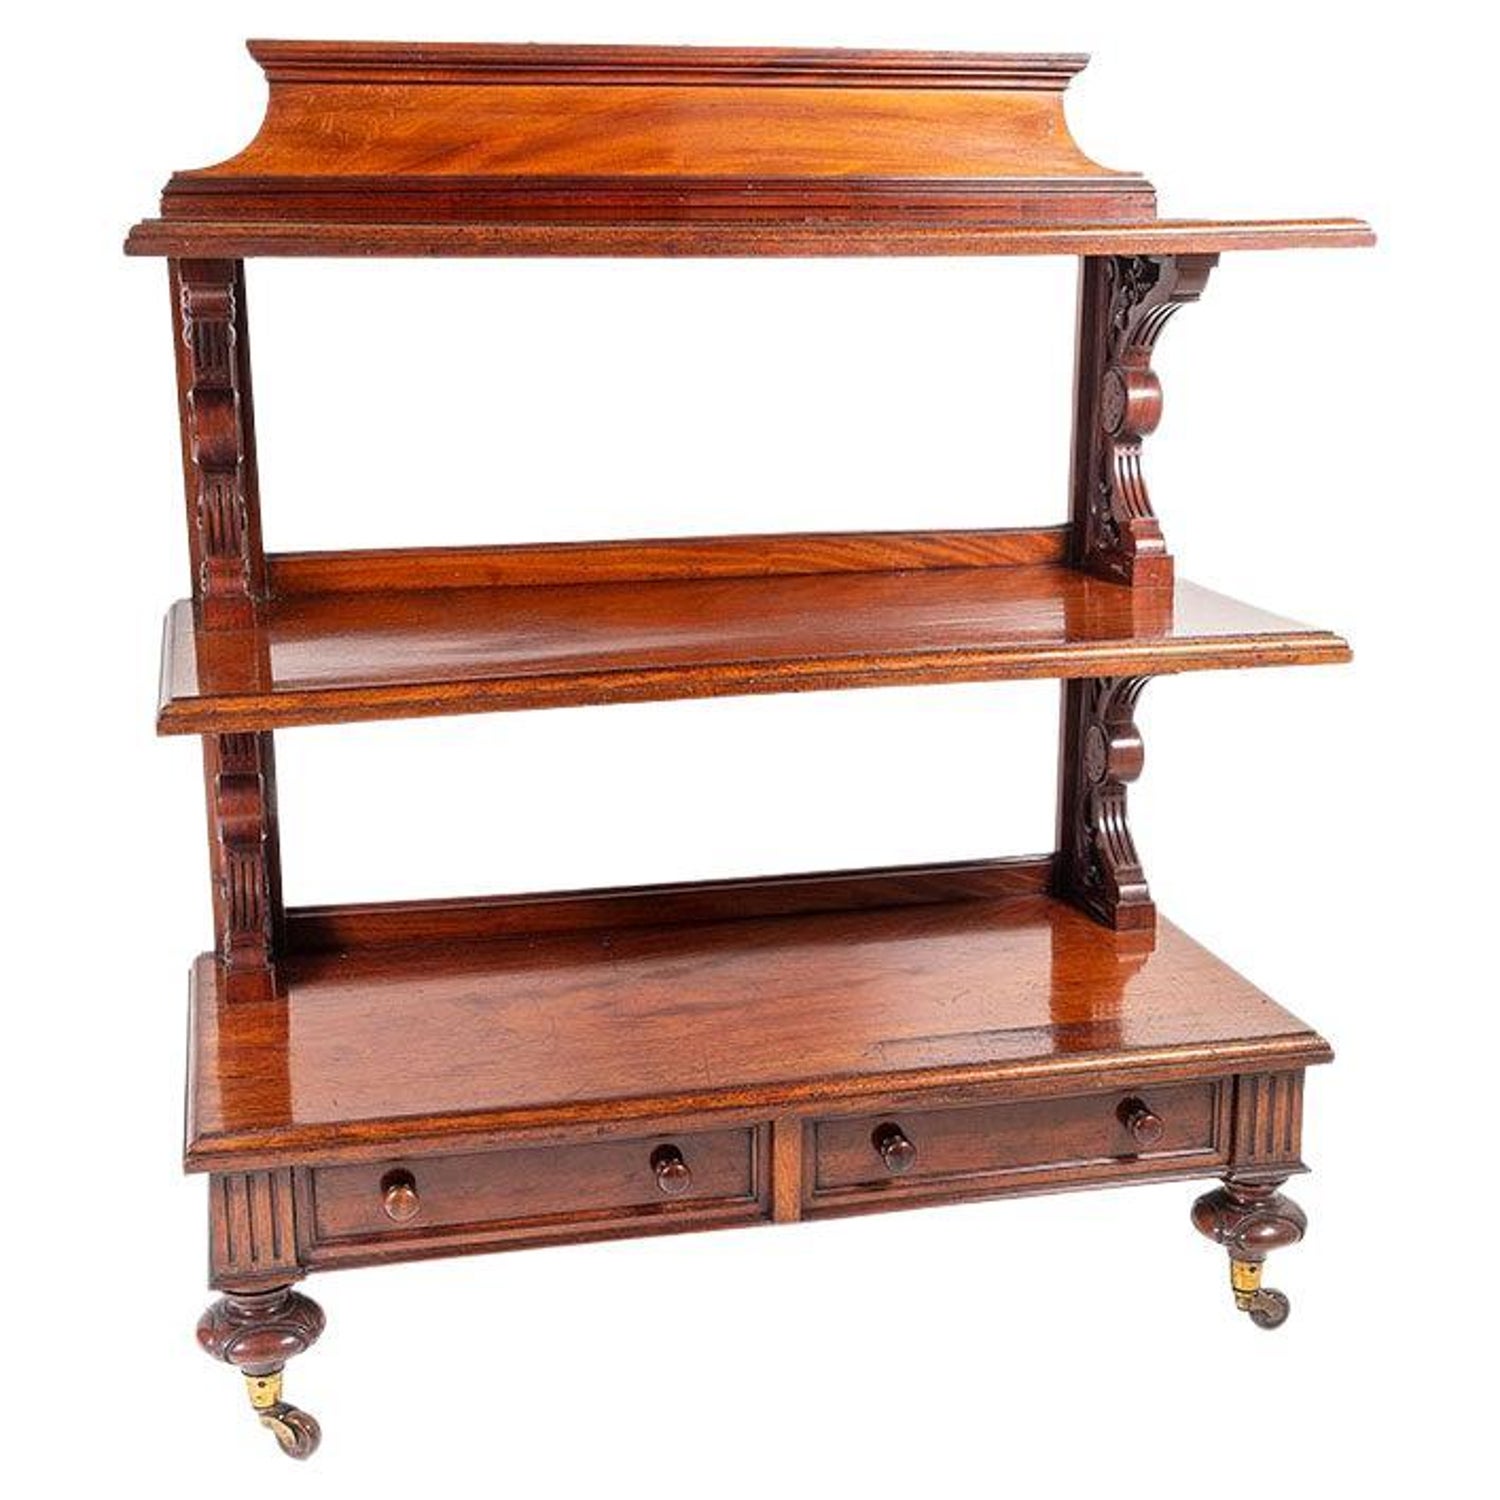 https://a.1stdibscdn.com/19th-century-antique-mahogany-three-tier-buffet-table-with-drawer-storage-for-sale/f_64622/f_307043321664902037085/f_30704332_1664902037282_bg_processed.jpg?width=1500